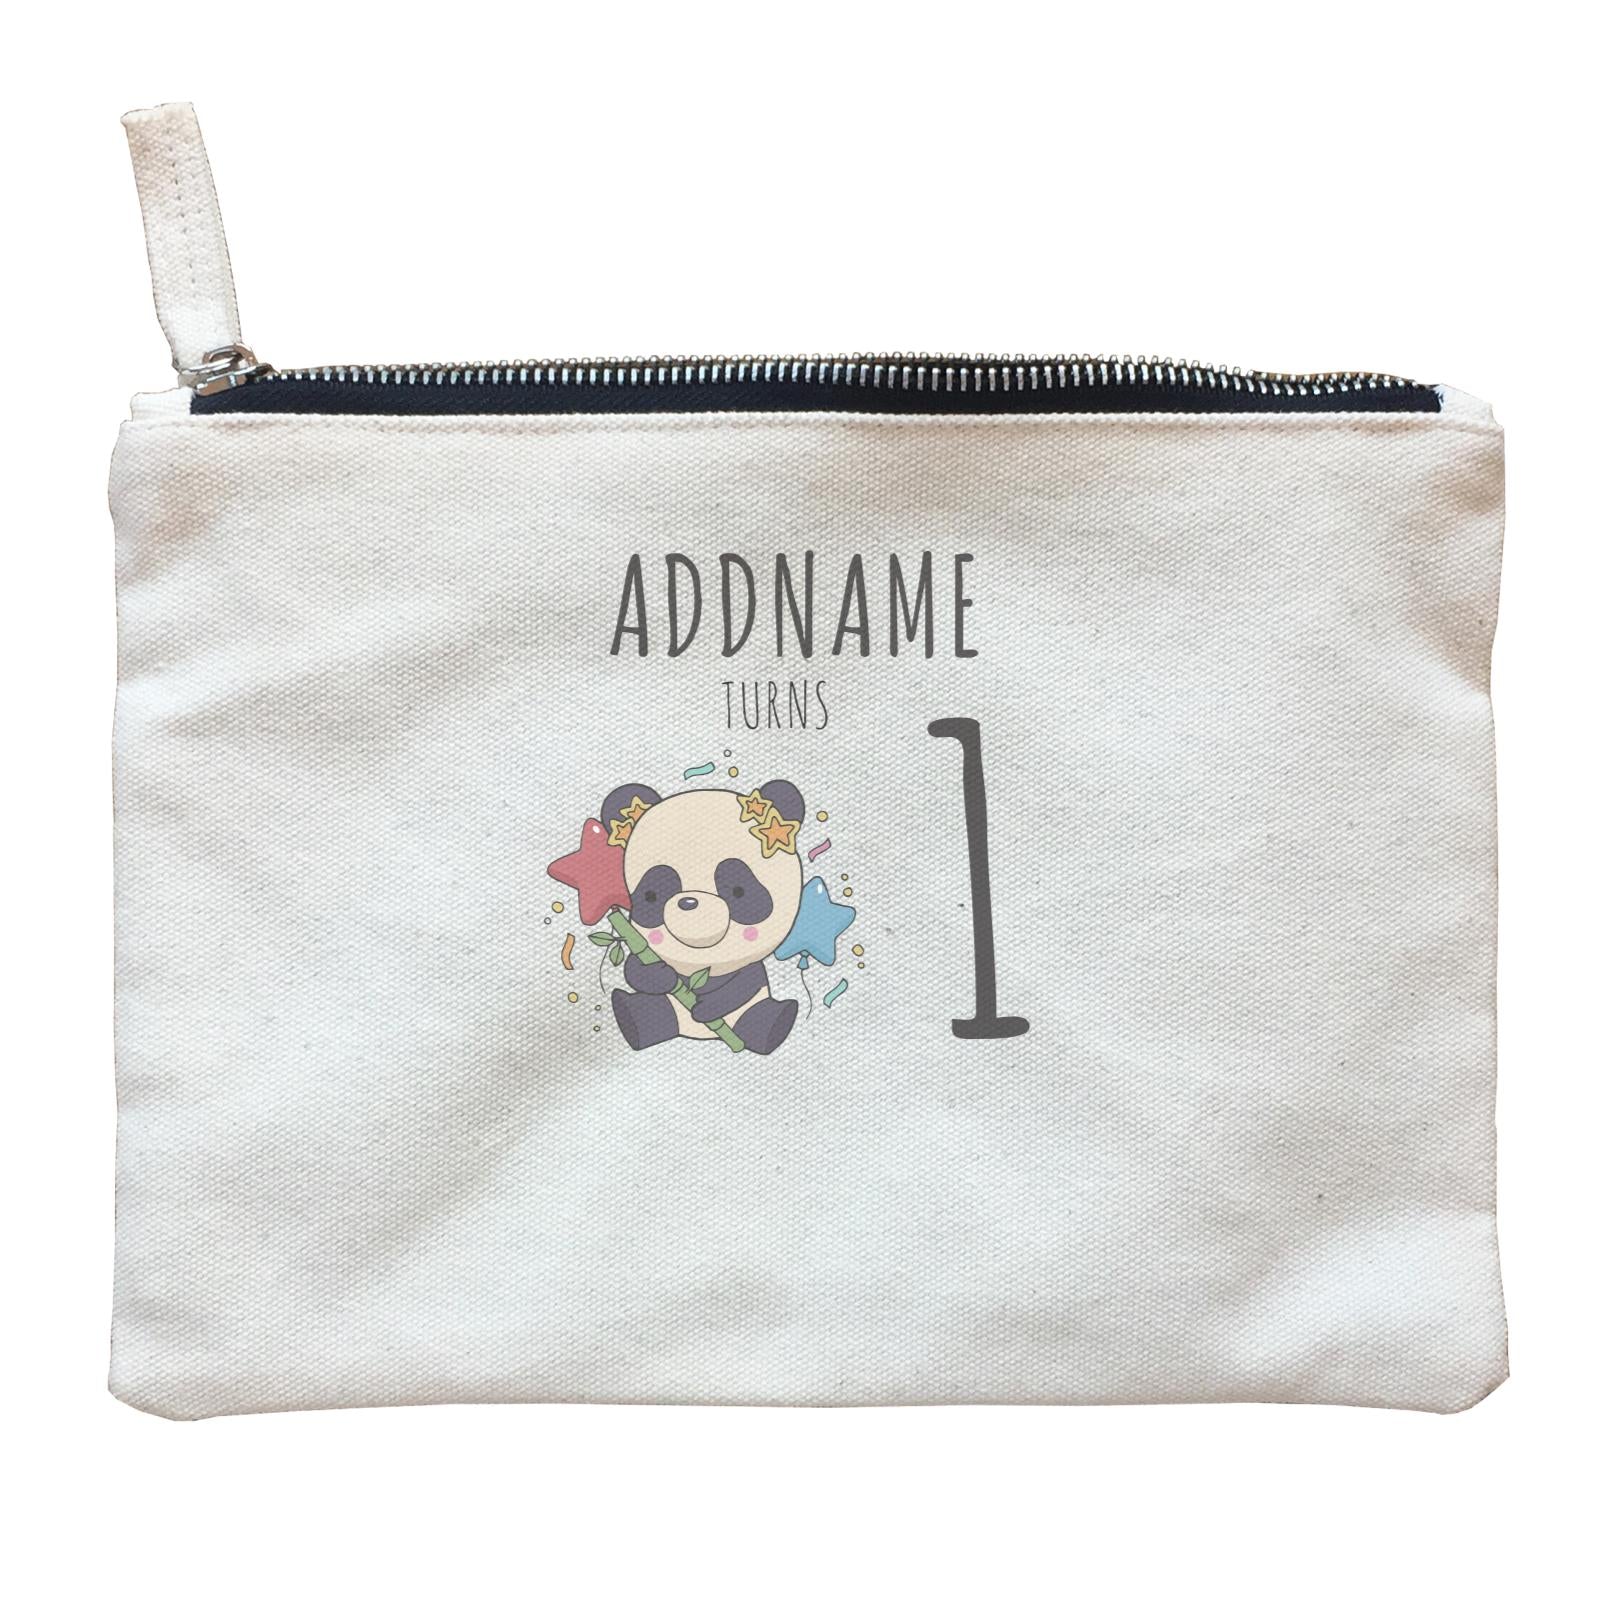 Birthday Sketch Animals Panda with Party Hat Holding Bamboo Addname Turns 1 Zipper Pouch